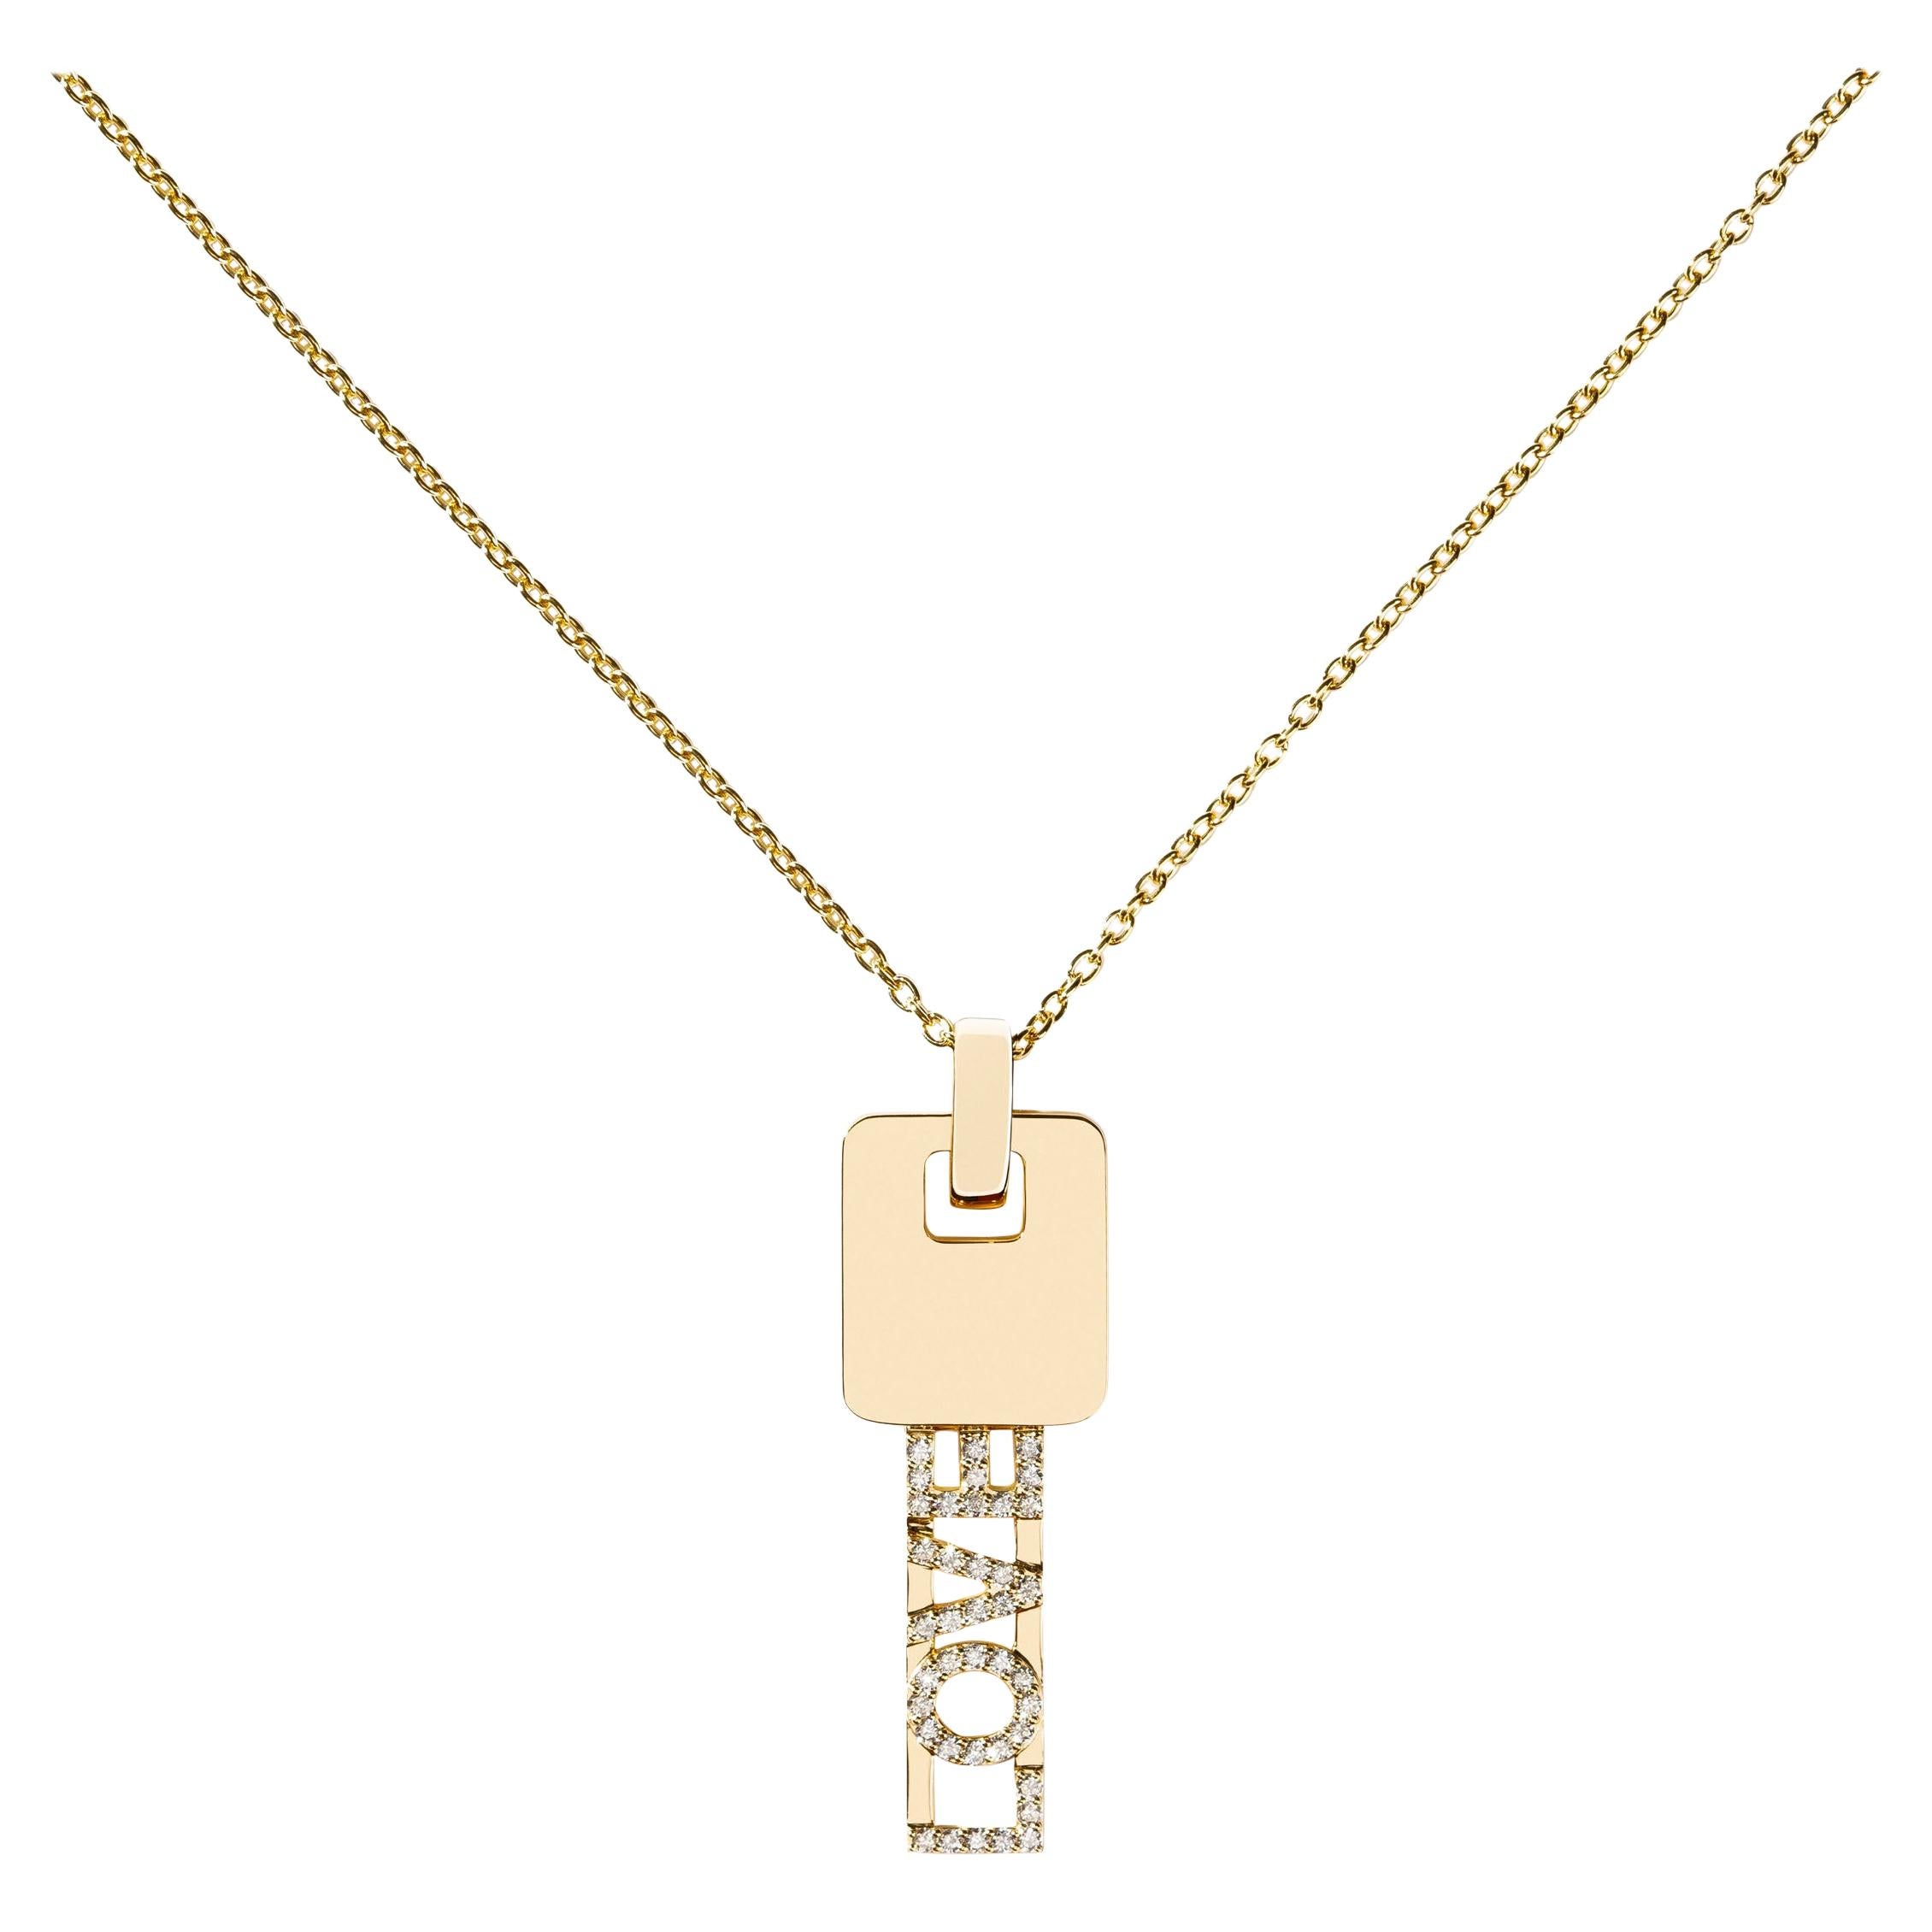 AS29 Diamond Love Key Necklace in 18k Yellow Gold For Sale